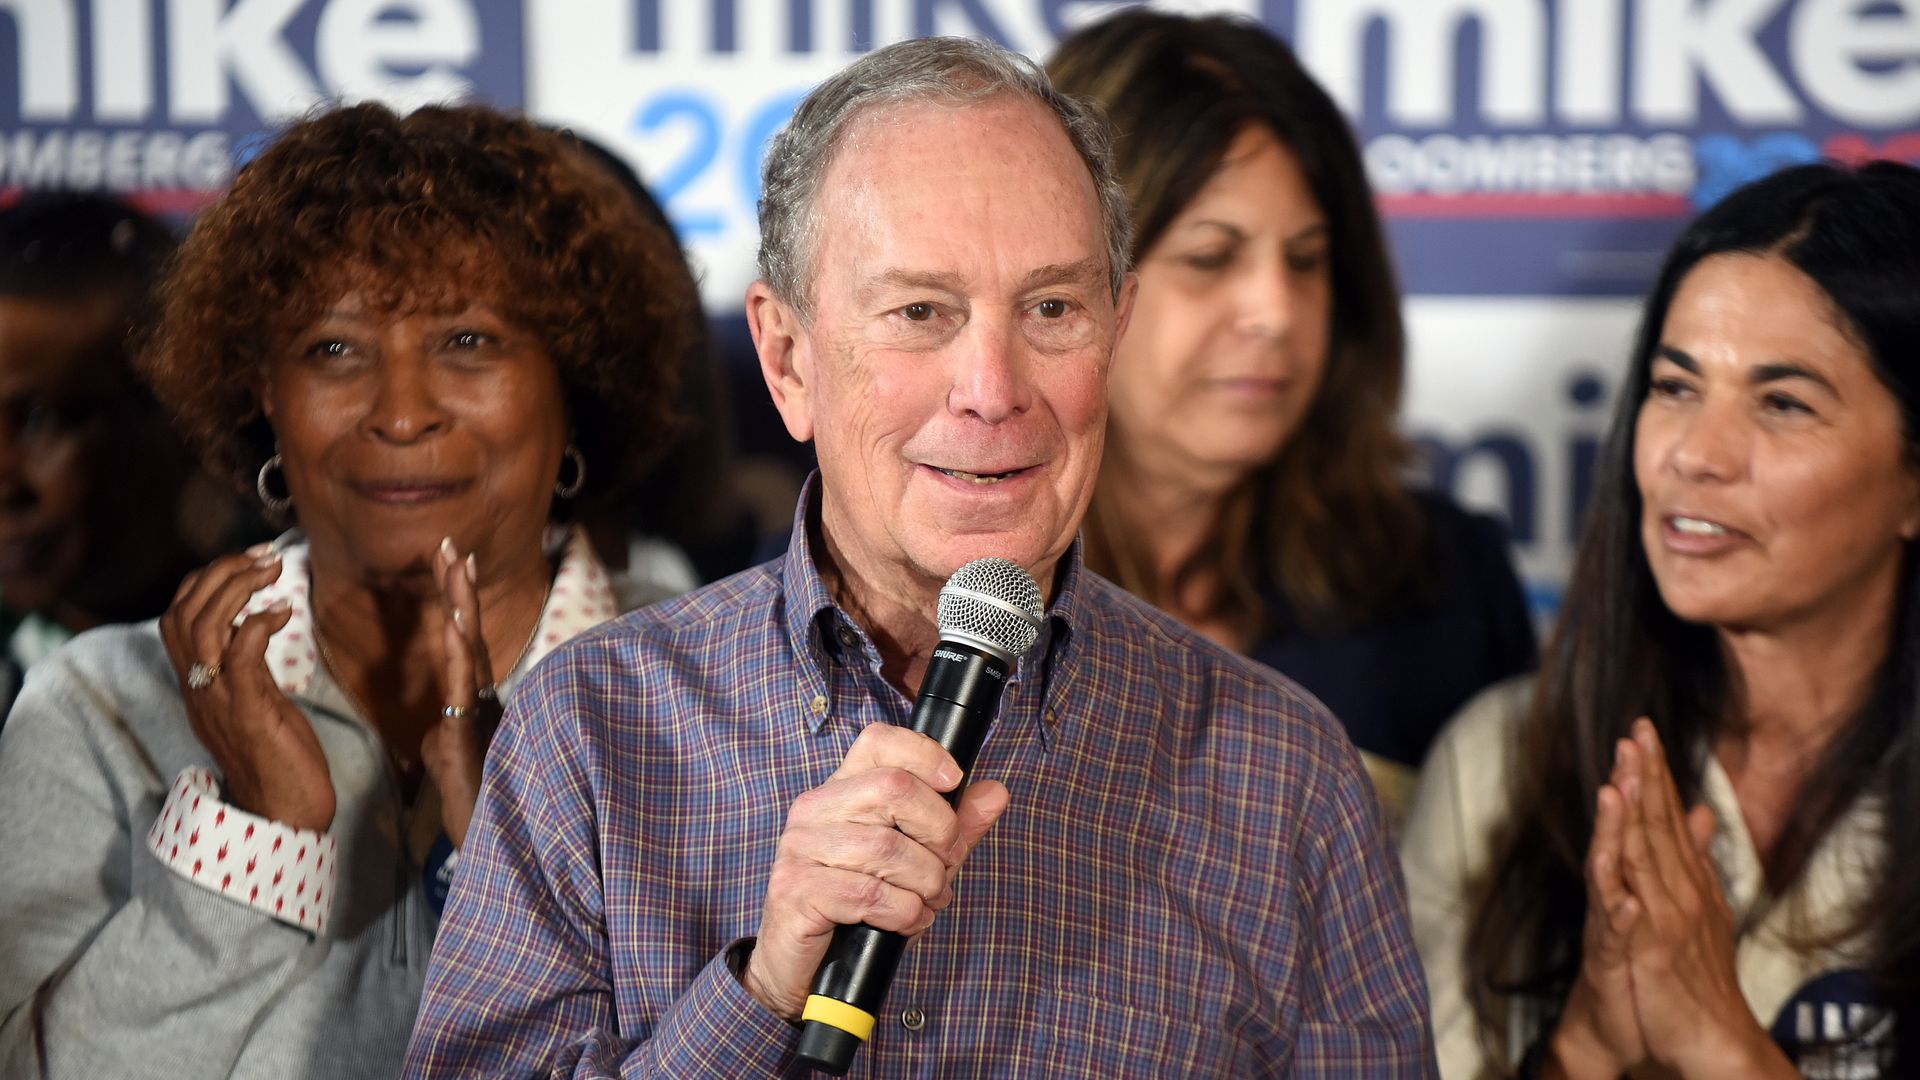 In this image, Bloomberg holds a microphone 